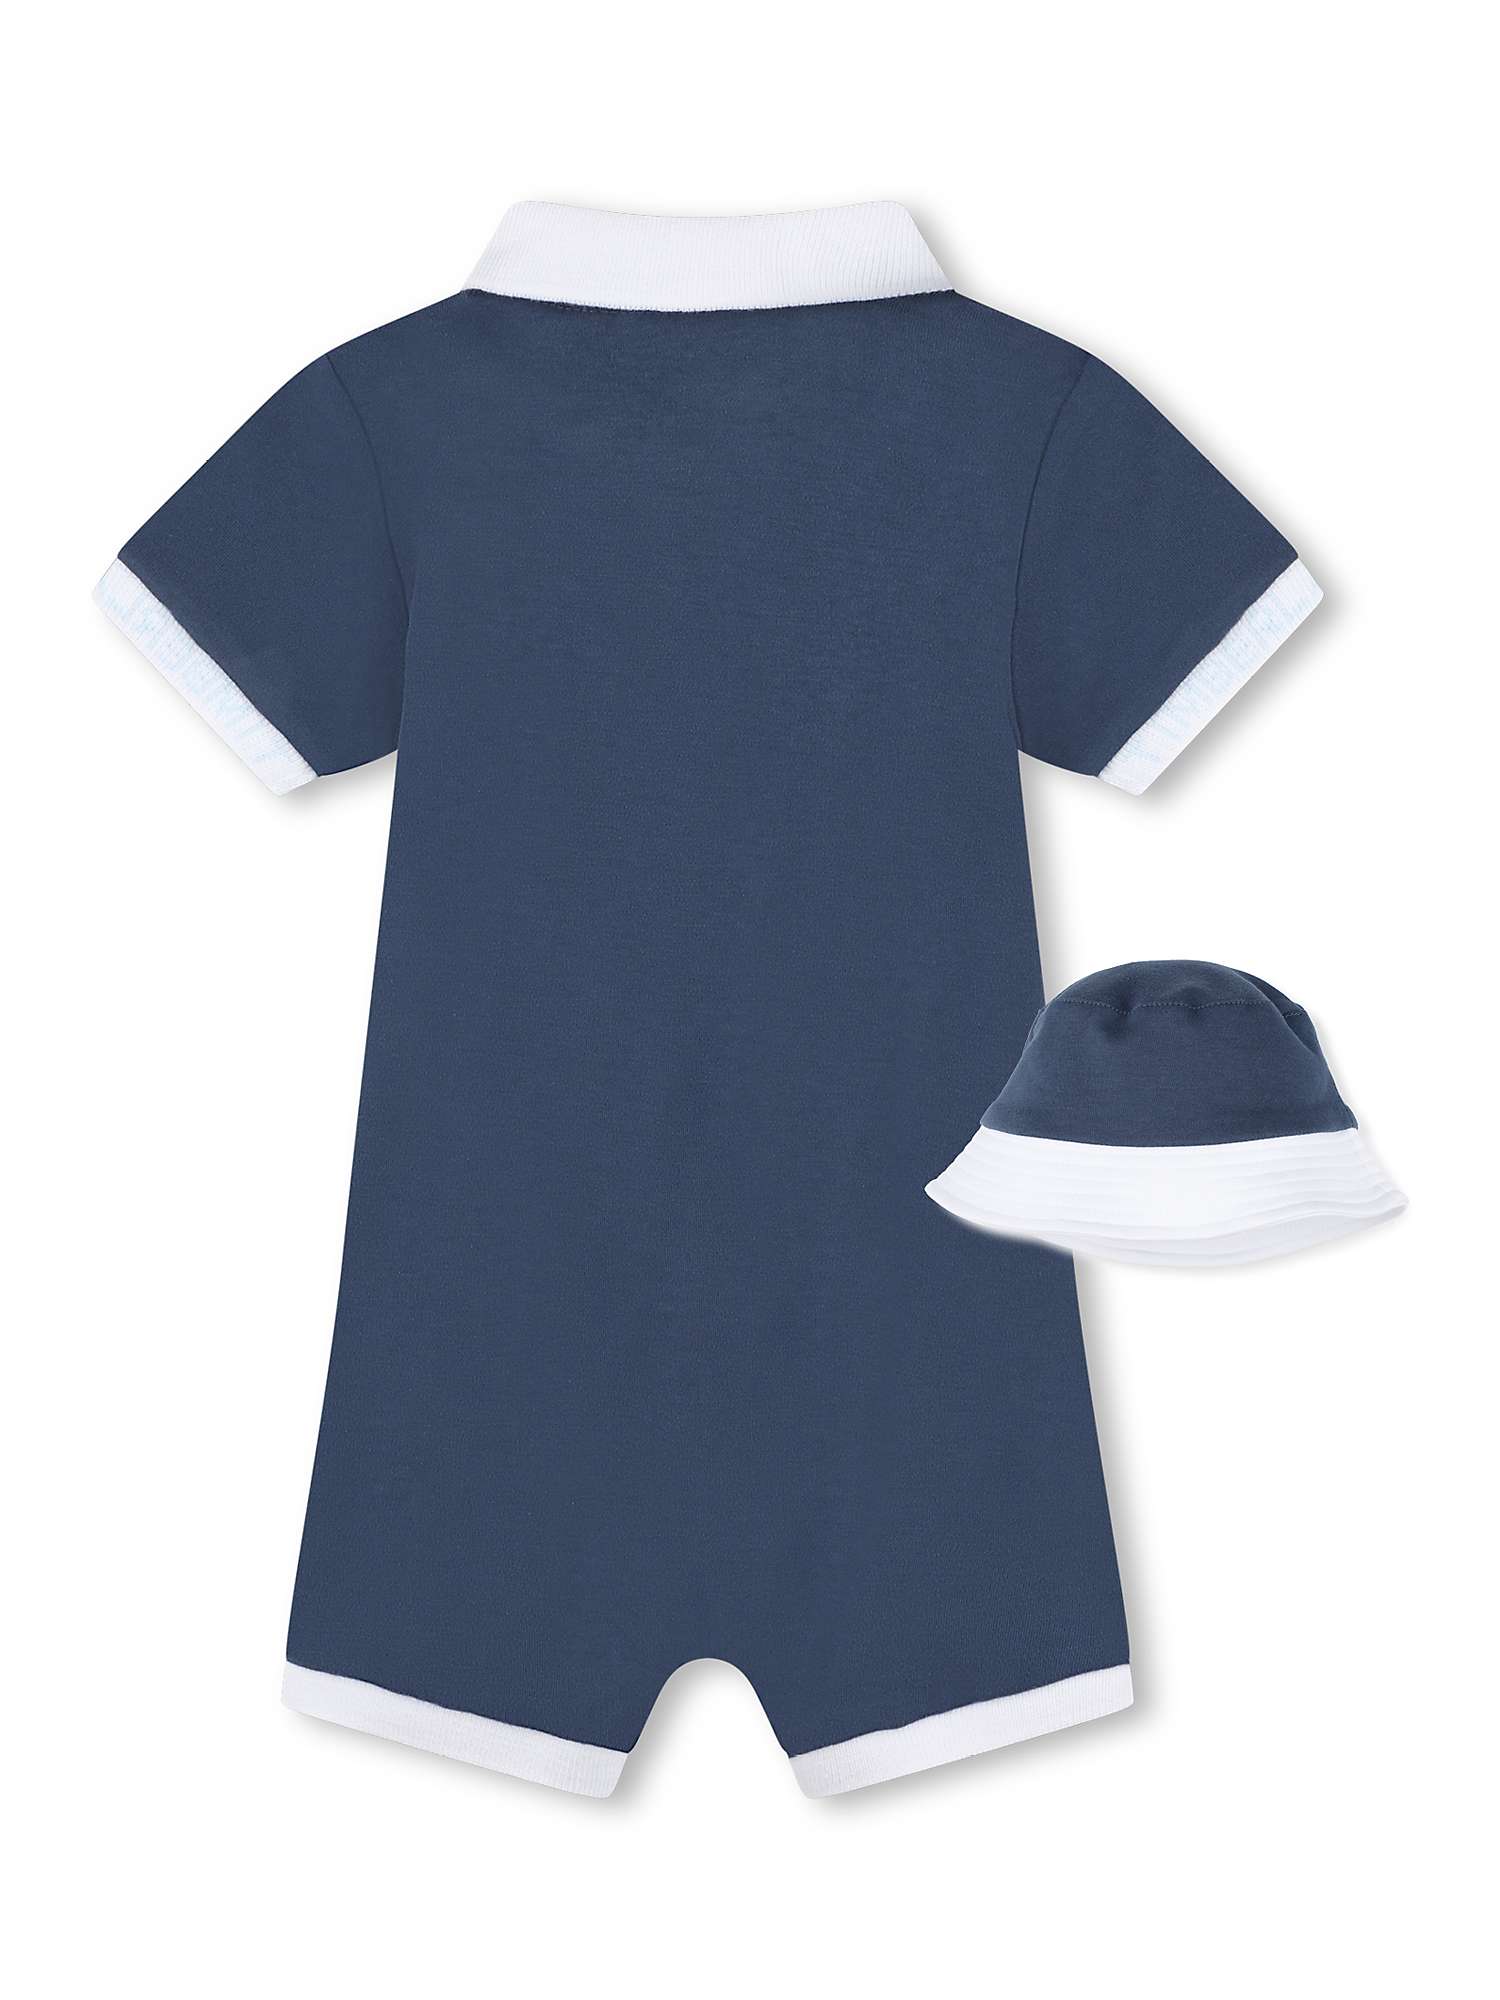 Buy Timberland Baby Overalls & Reversible Hat Set Online at johnlewis.com